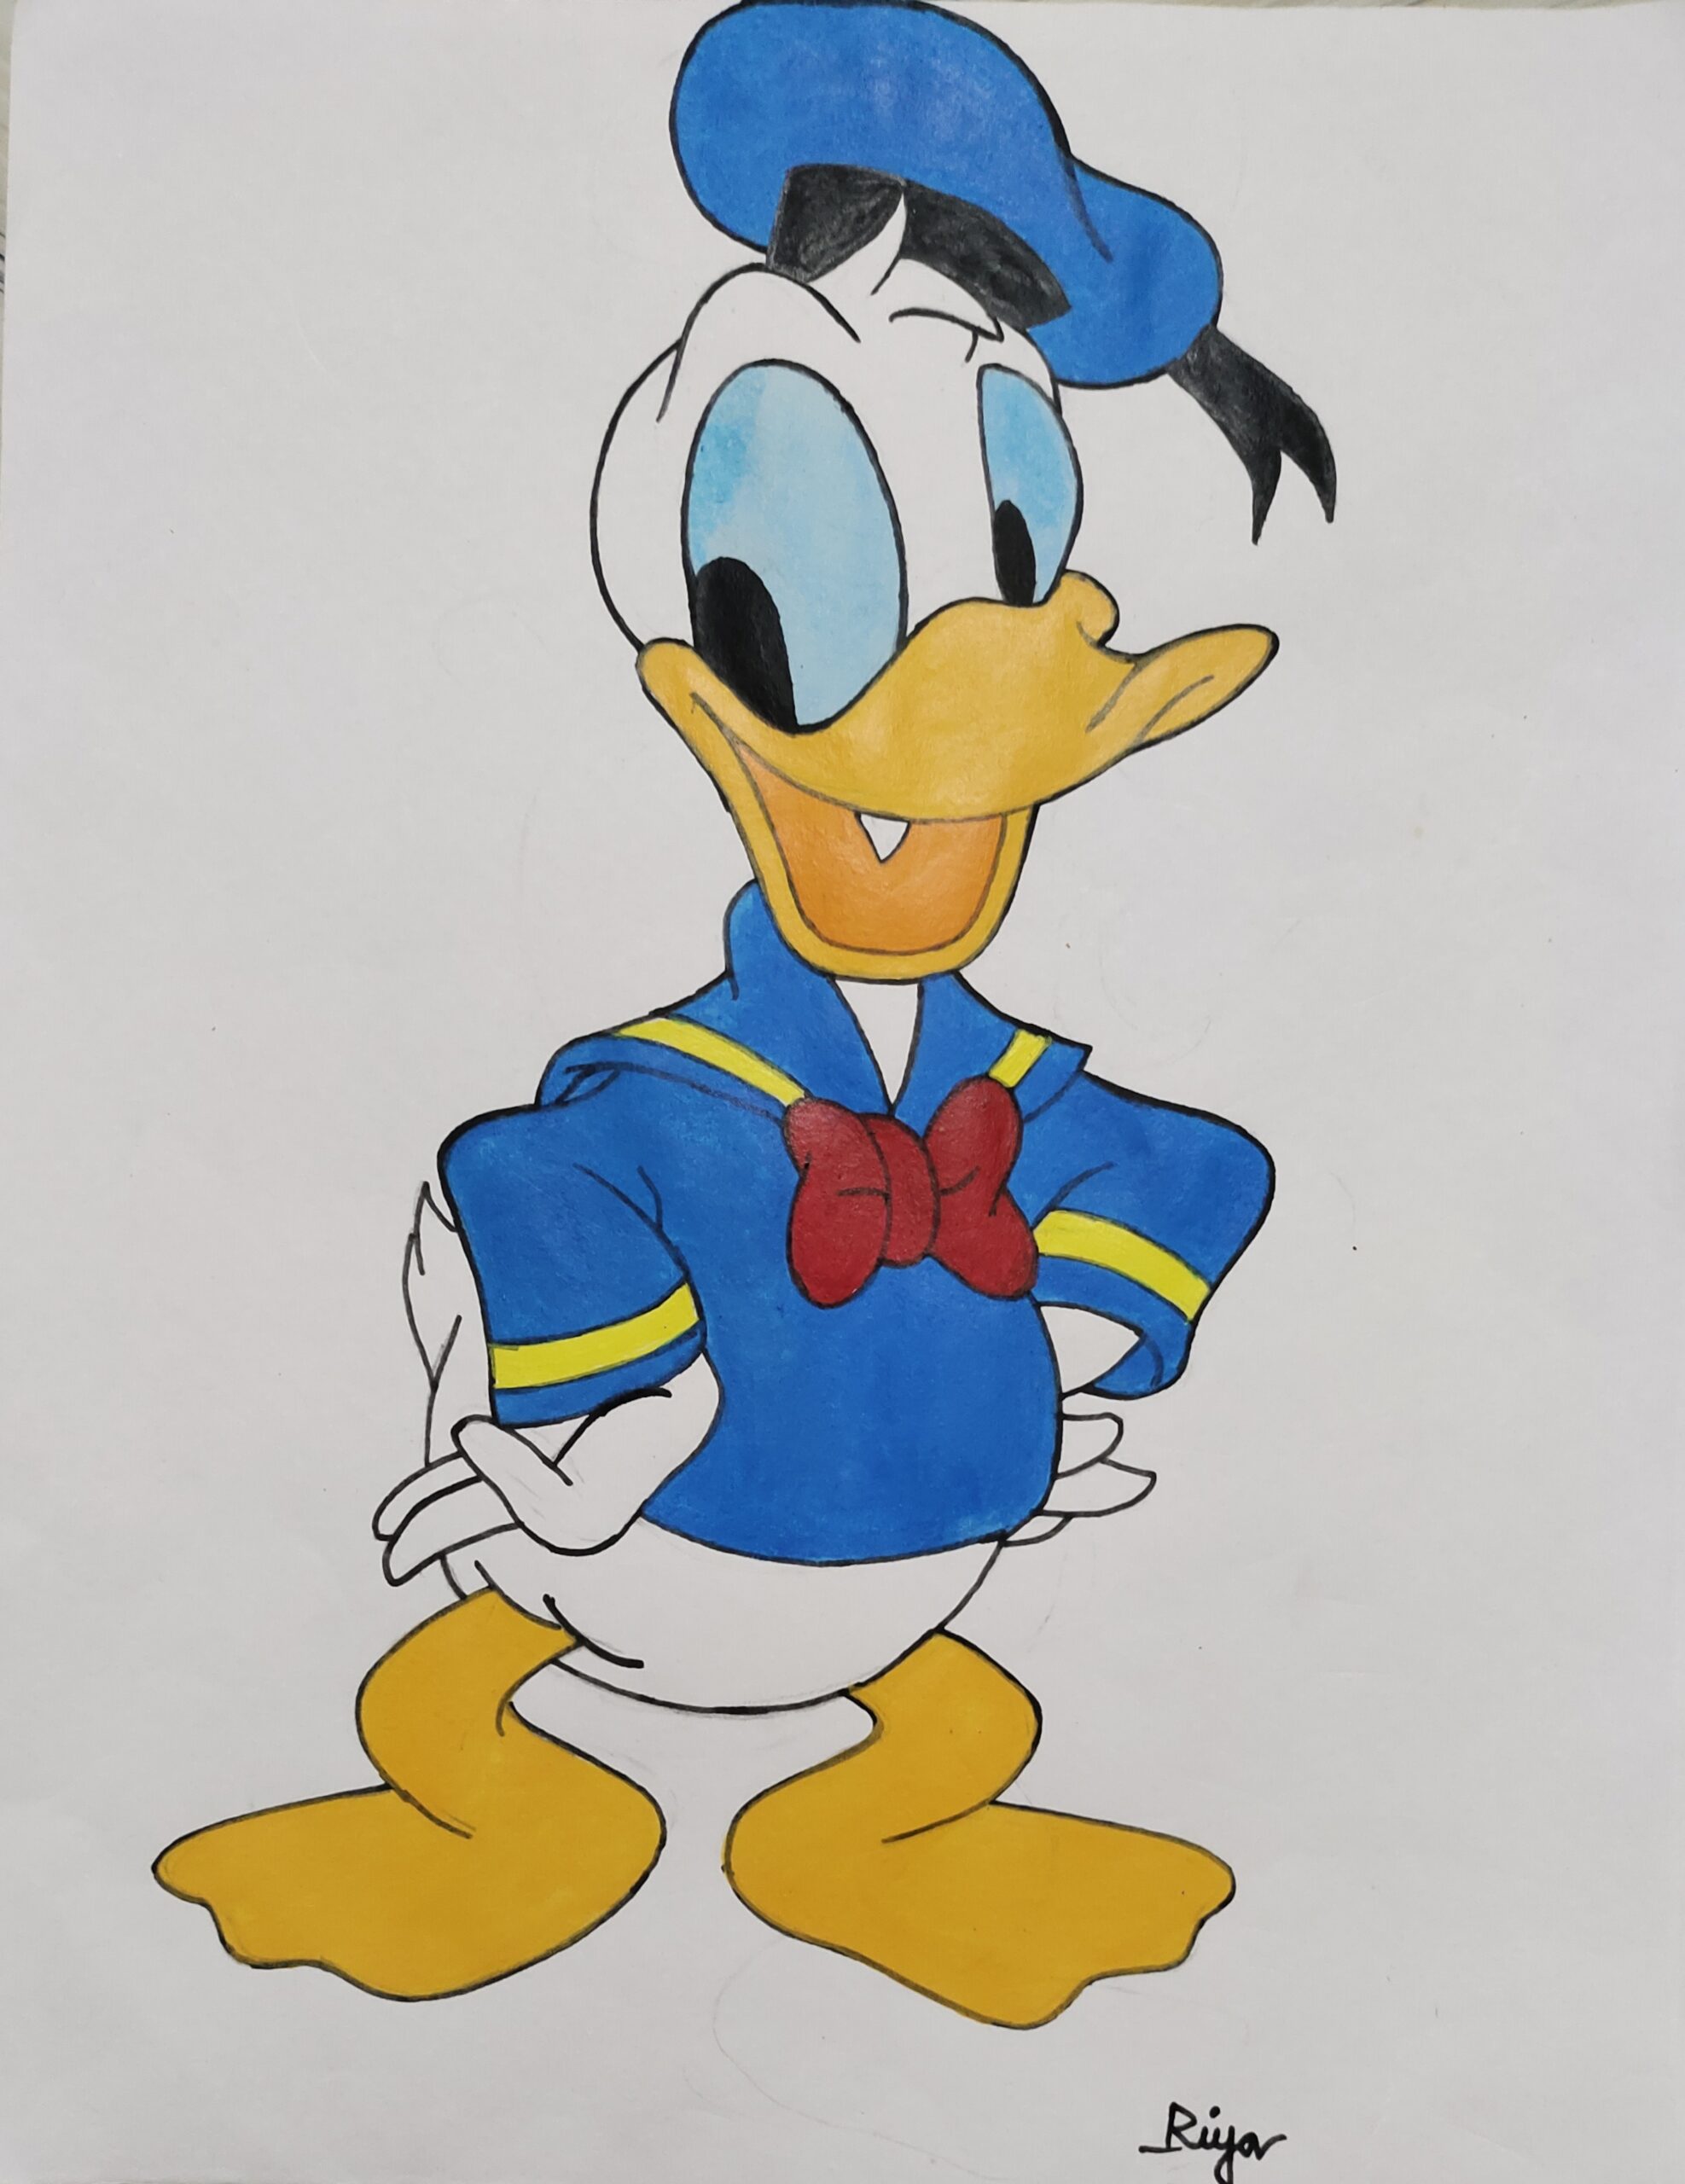 How to draw a Donald Duck Step by Step